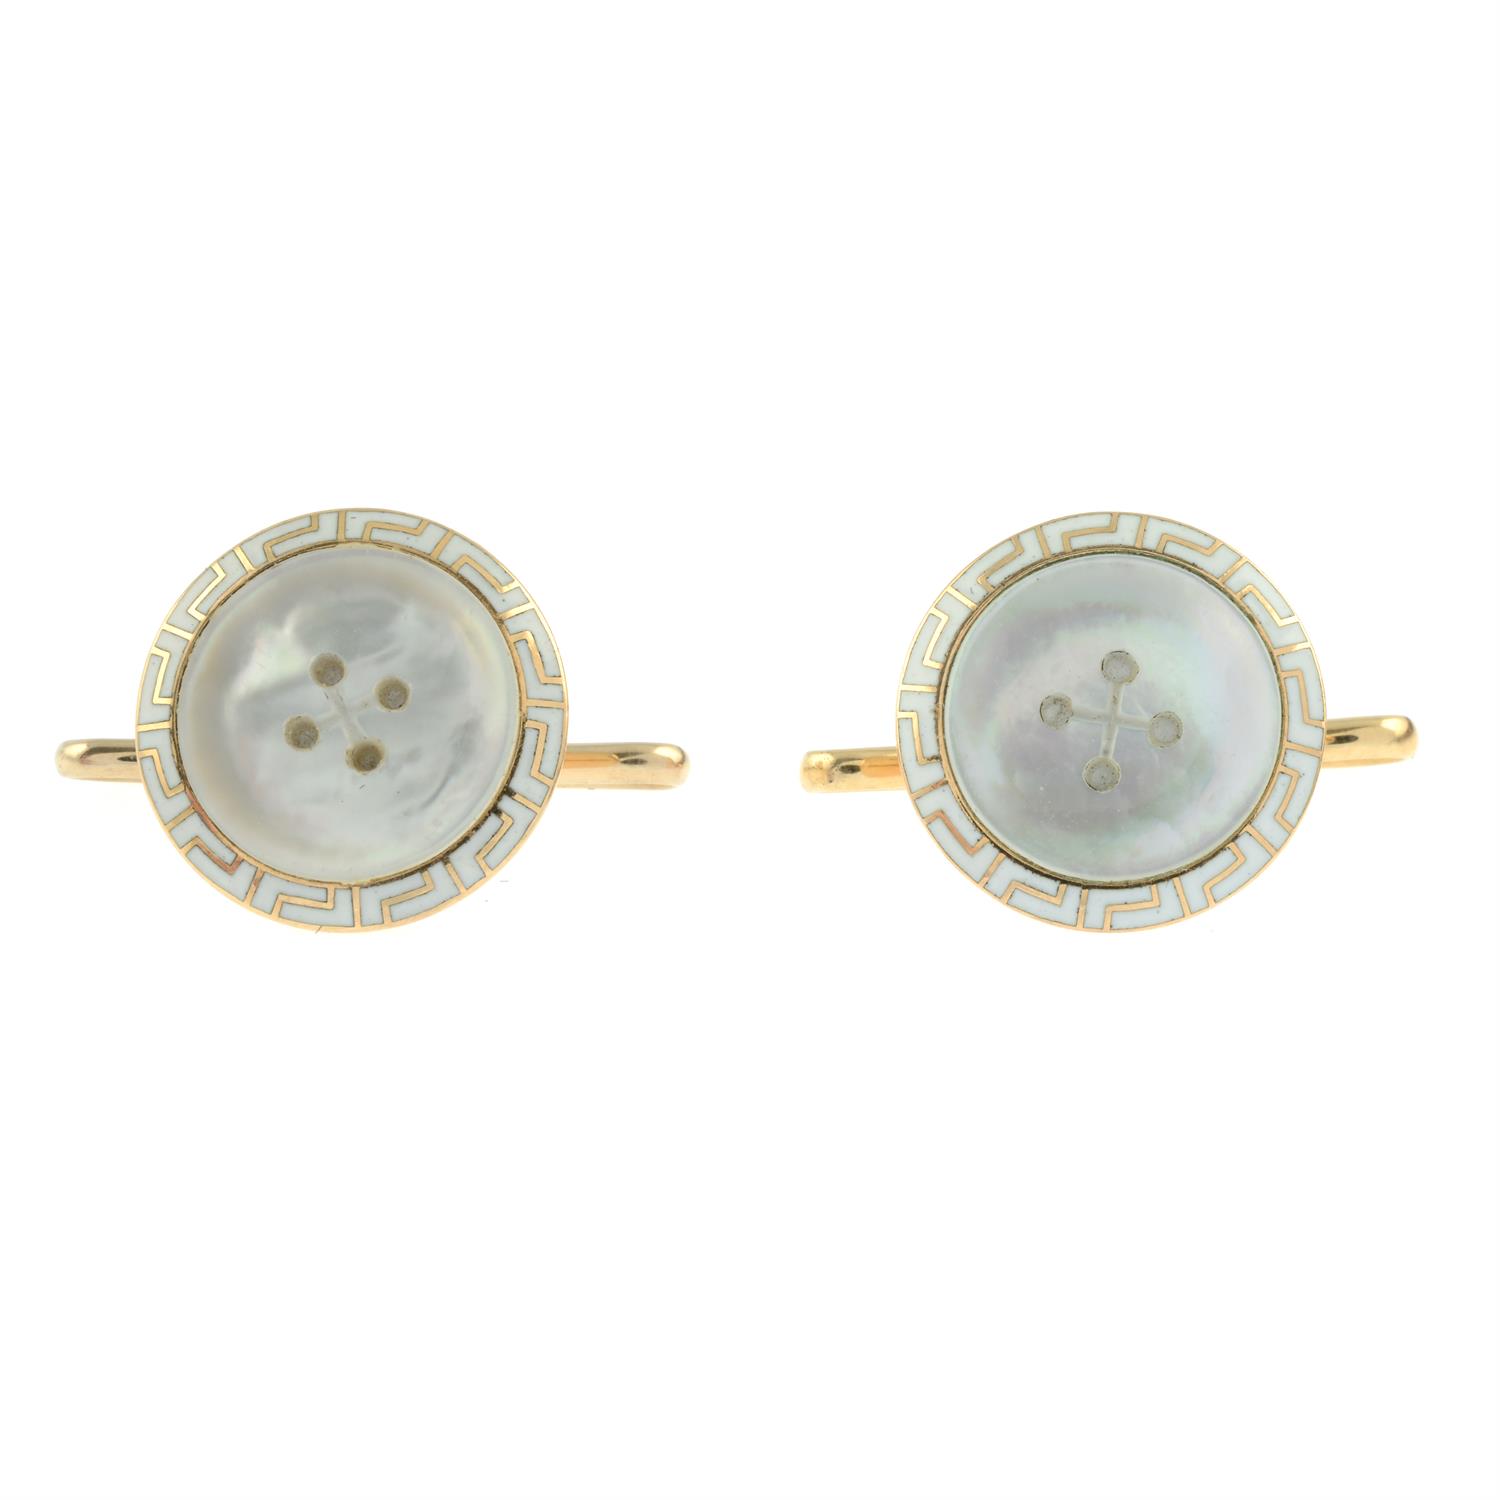 A pair of early 20th century 14ct gold carved mother-of-pearl and white enamel button motif - Image 2 of 3